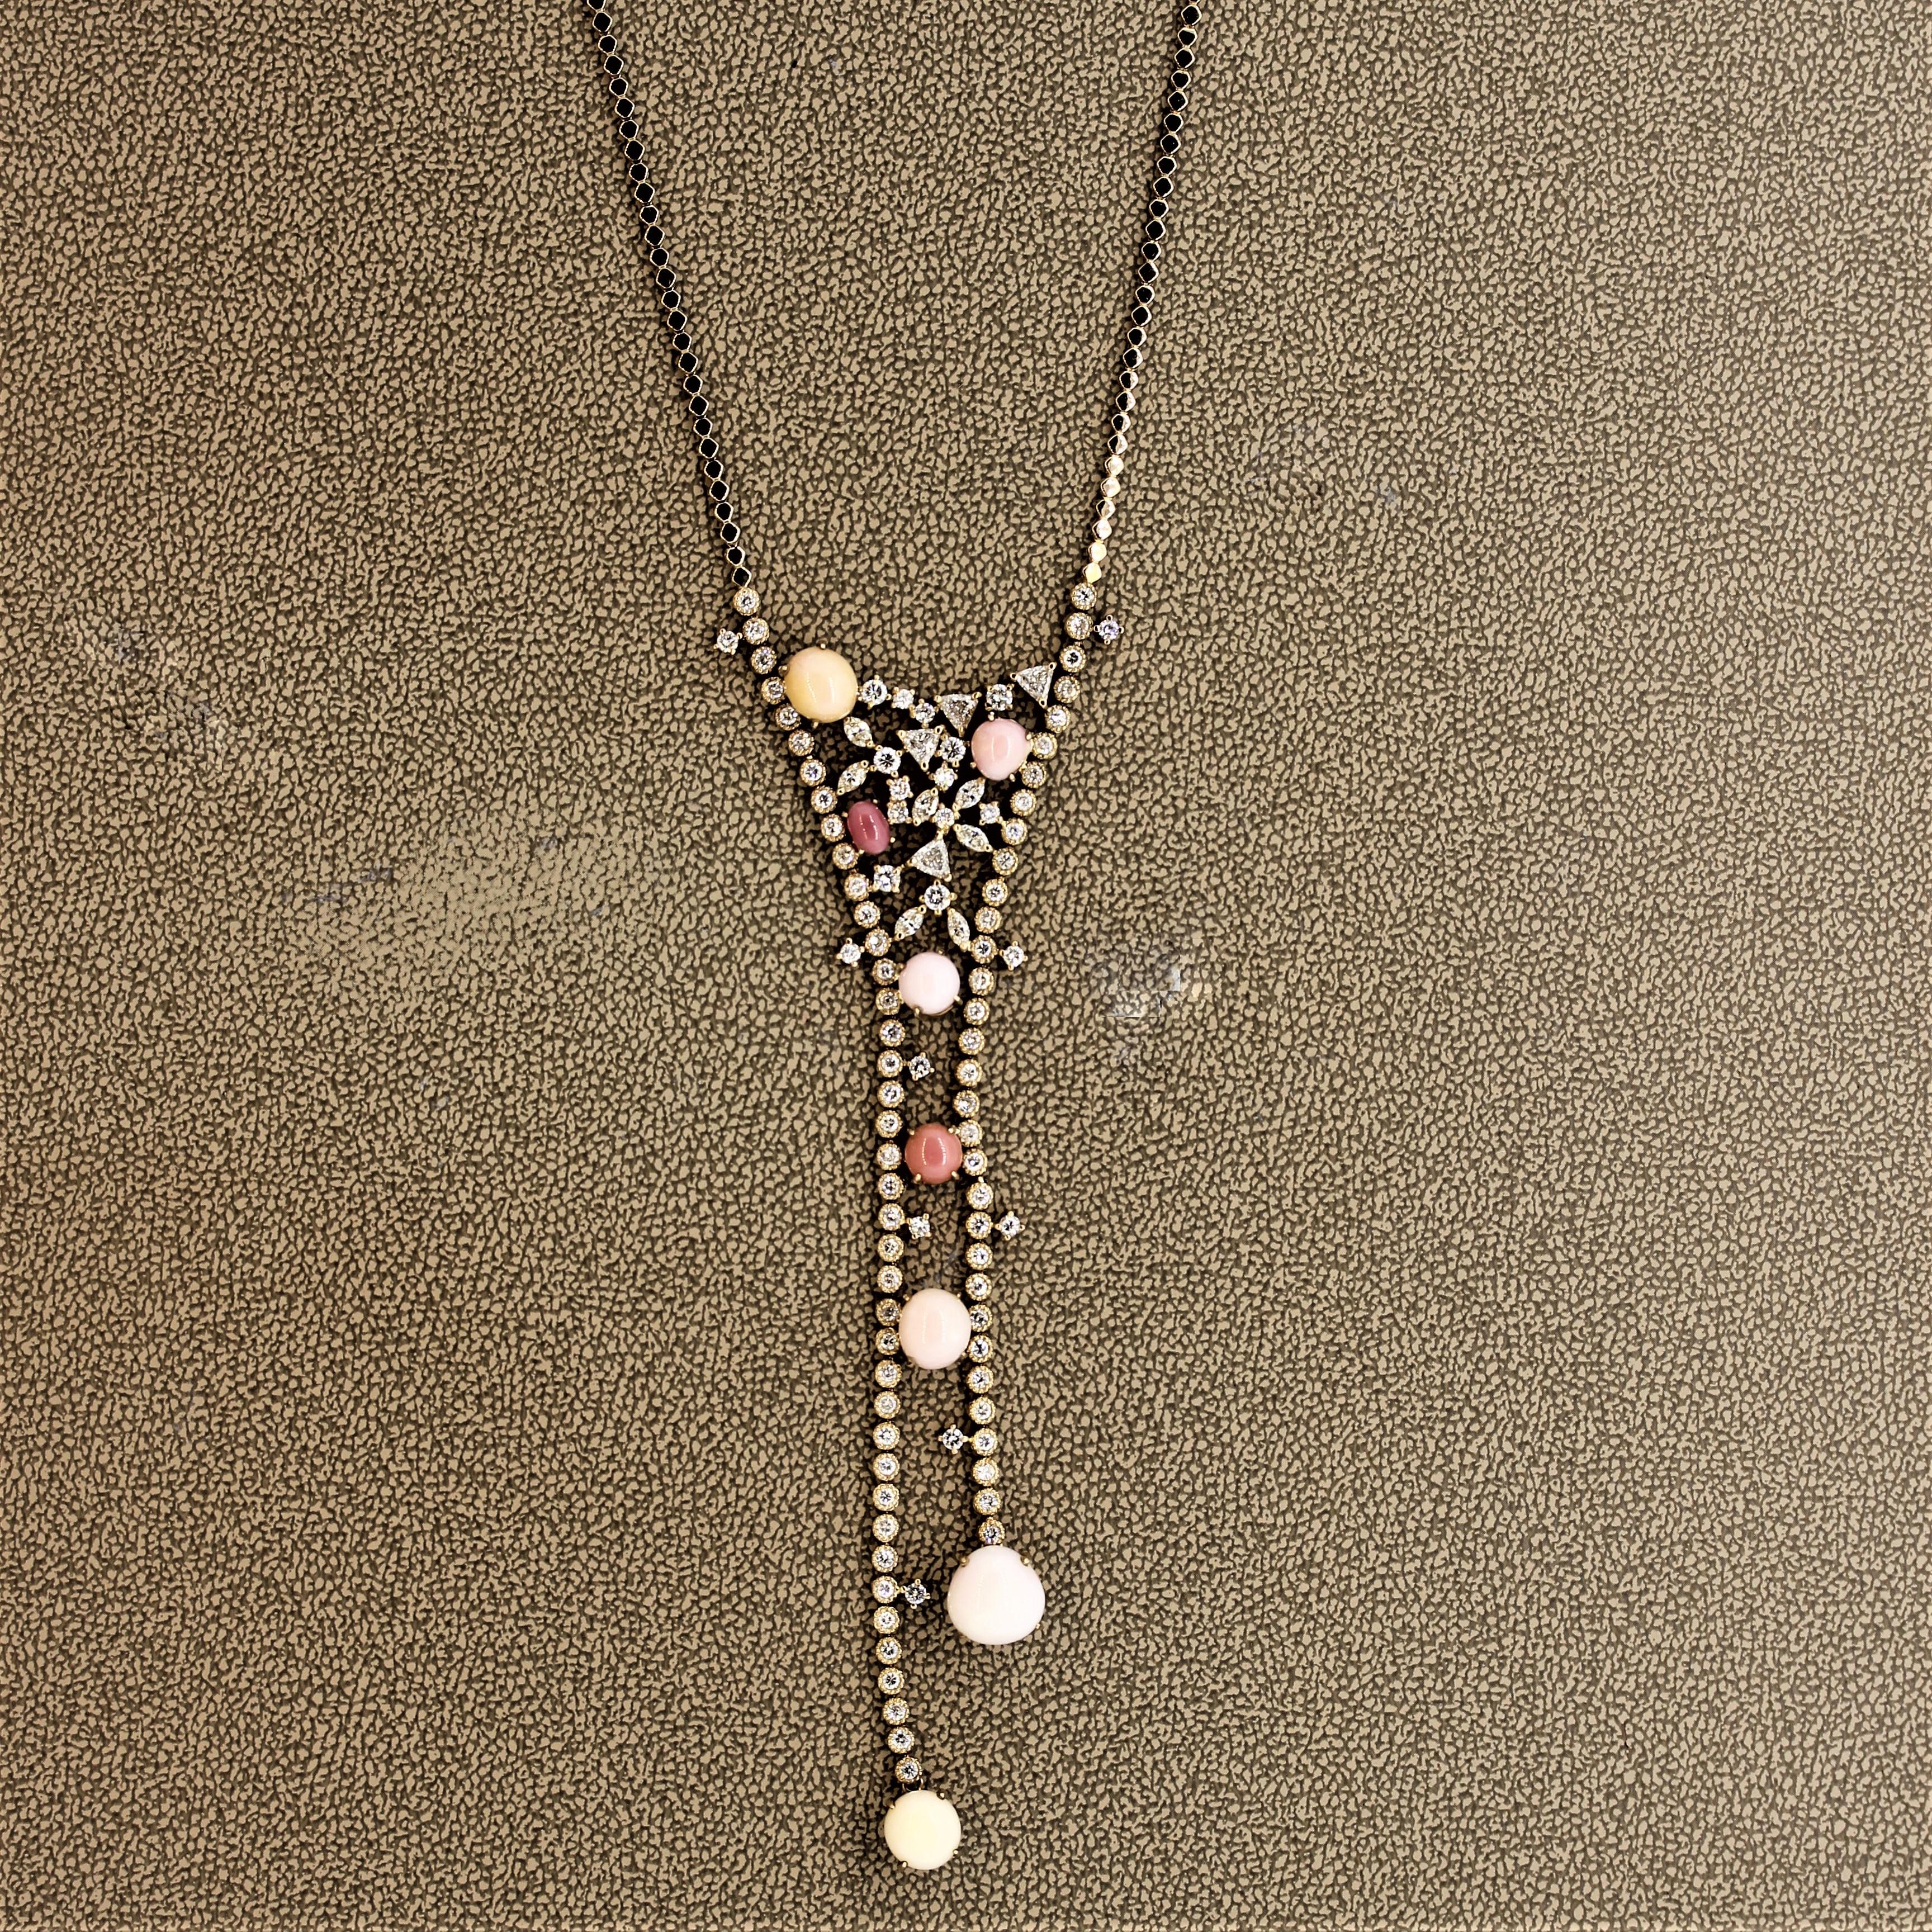 A one-of-a-kind piece featuring natural and rare conch pearls. There are a total of 8 conch pearls ranging from a cream color to vivid pinks and weigh a total of 12.40 carats. Adding to that are 2.50 carats of round brilliant and triangular cut